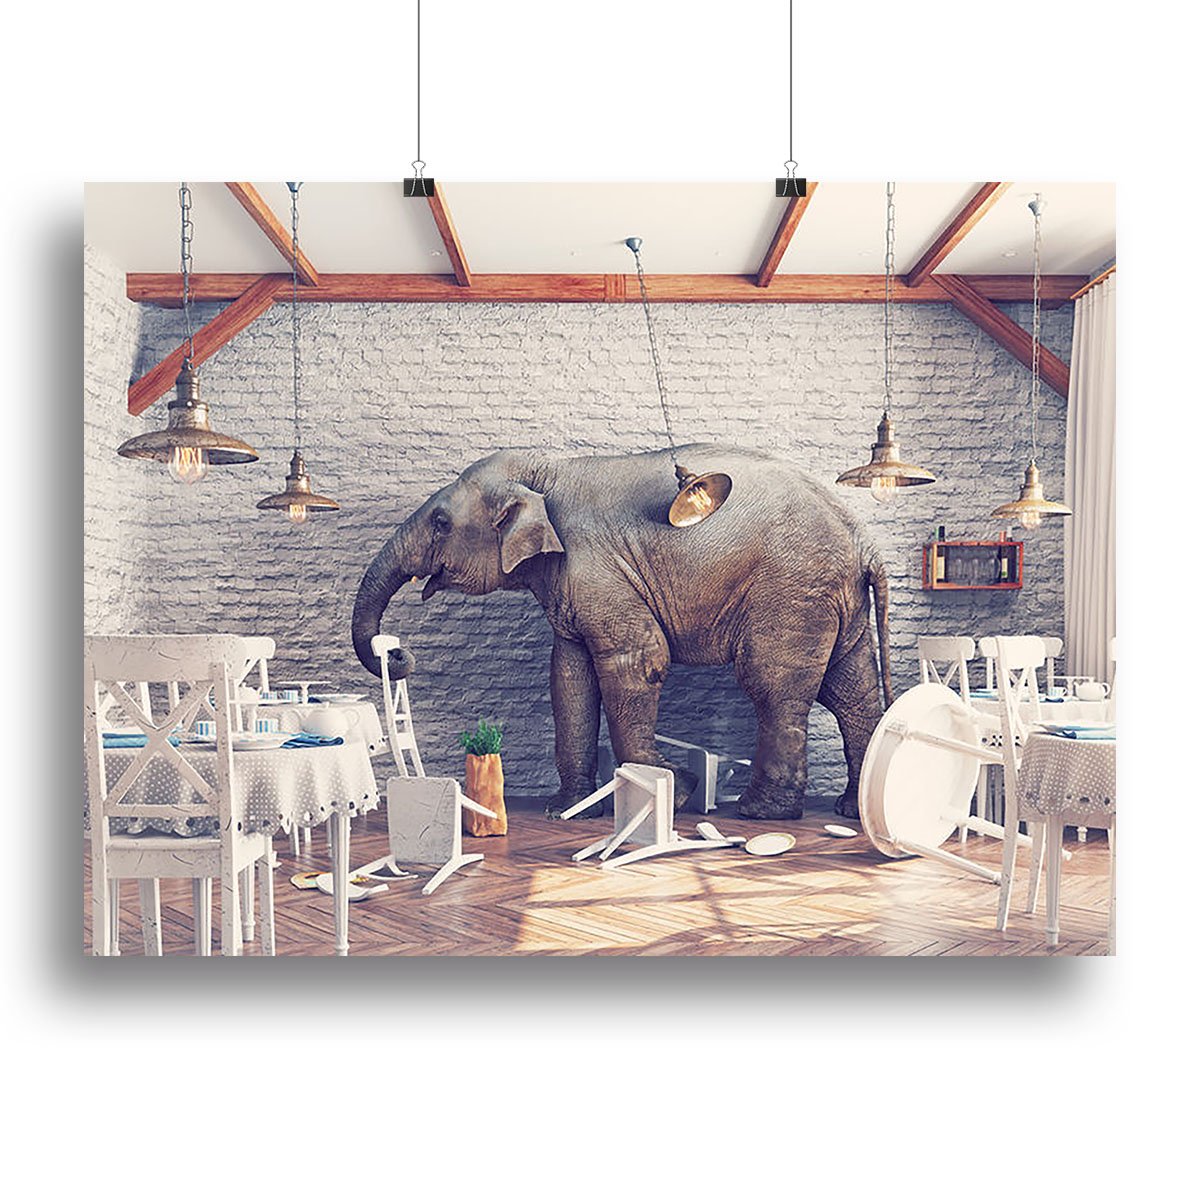 An elephant calm in a restaurant interior Canvas Print or Poster